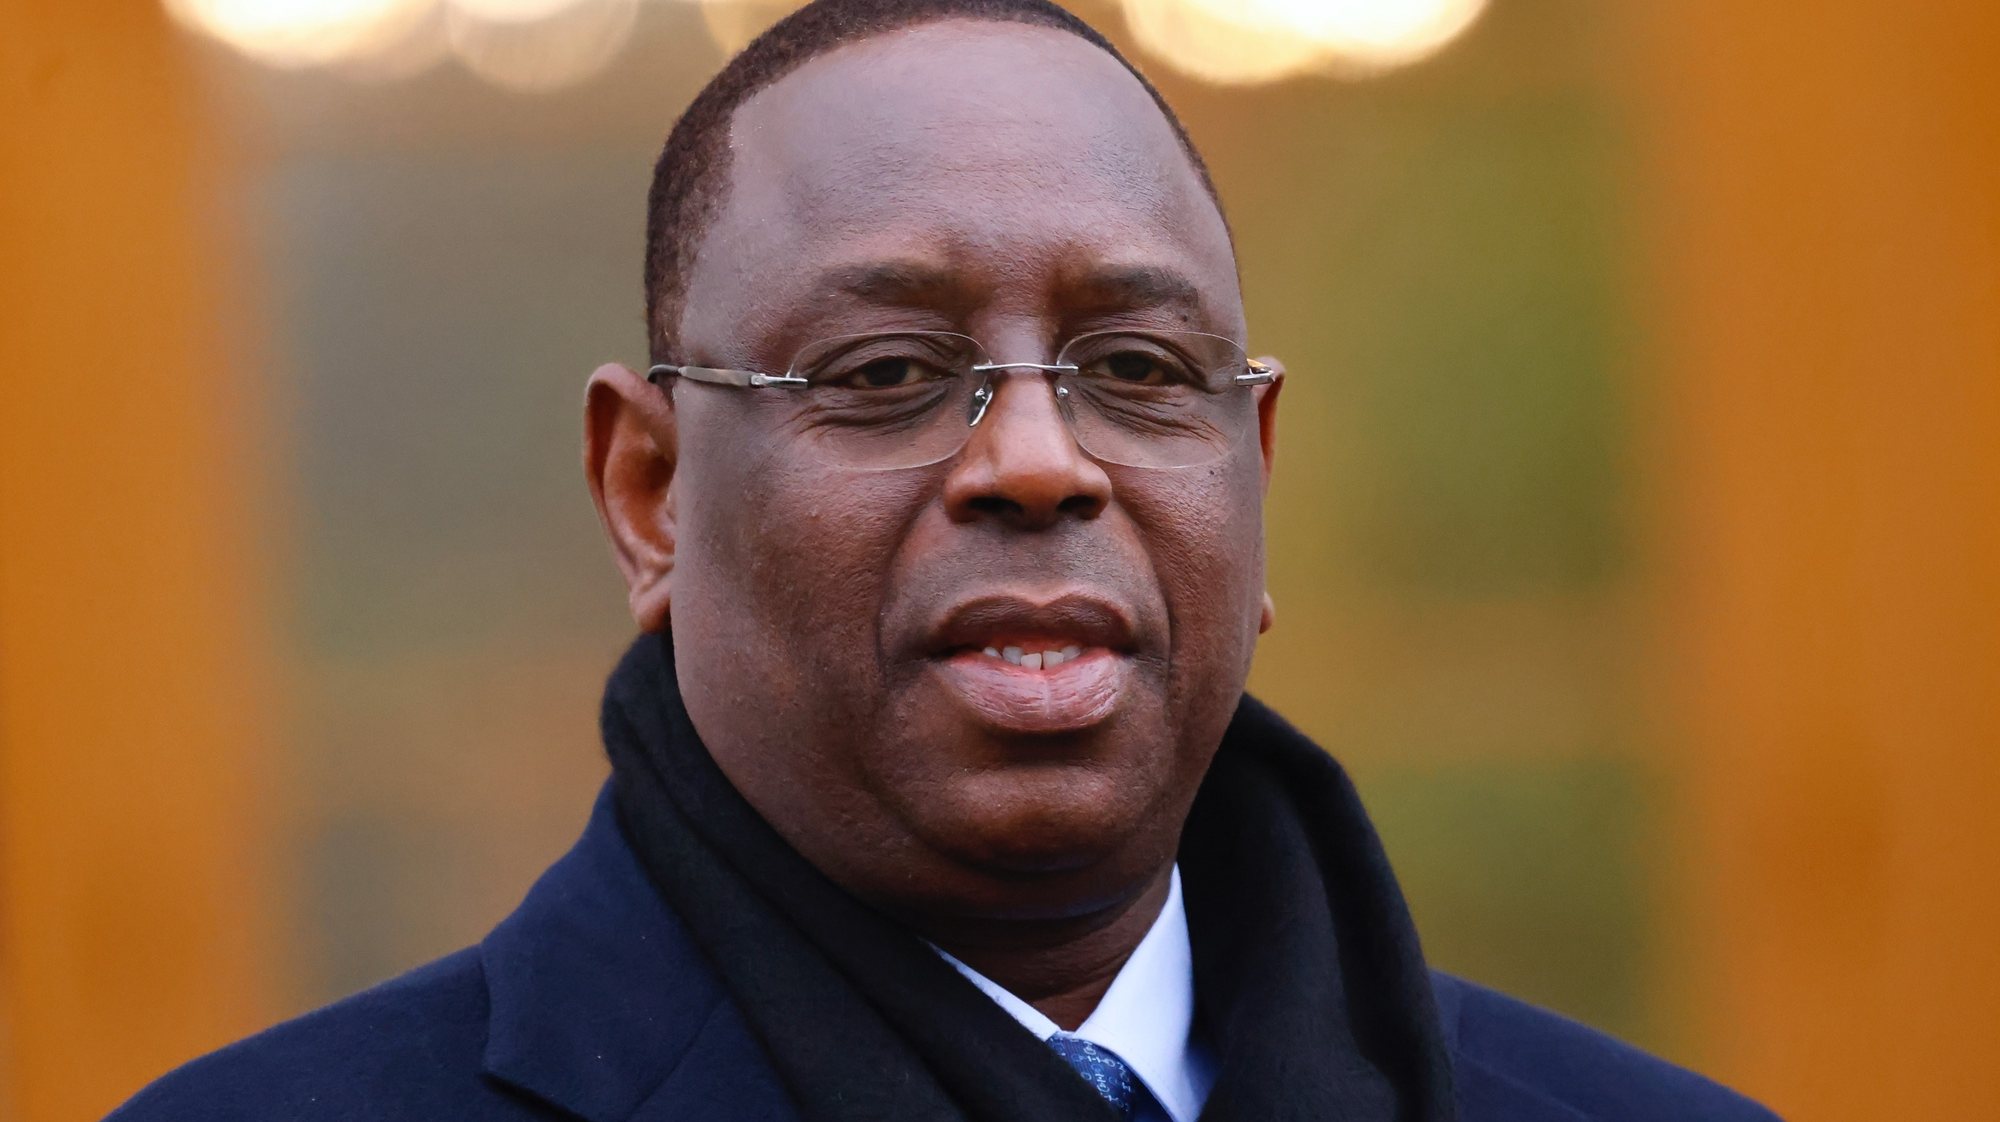 epa11123411 (FILE) Senegalese President Macky Sall arrives for the Compact with Africa (CwA) conference at the Bellevue Palace in Berlin, Germany, 20 November 2023 (reissued 24 February 2024). Senegal&#039;s President Macky Sall in a speech in Dakar on 03 February 2024 announced the postponement of presidential elections scheduled for 25 February.  EPA/HANNIBAL HANSCHKE